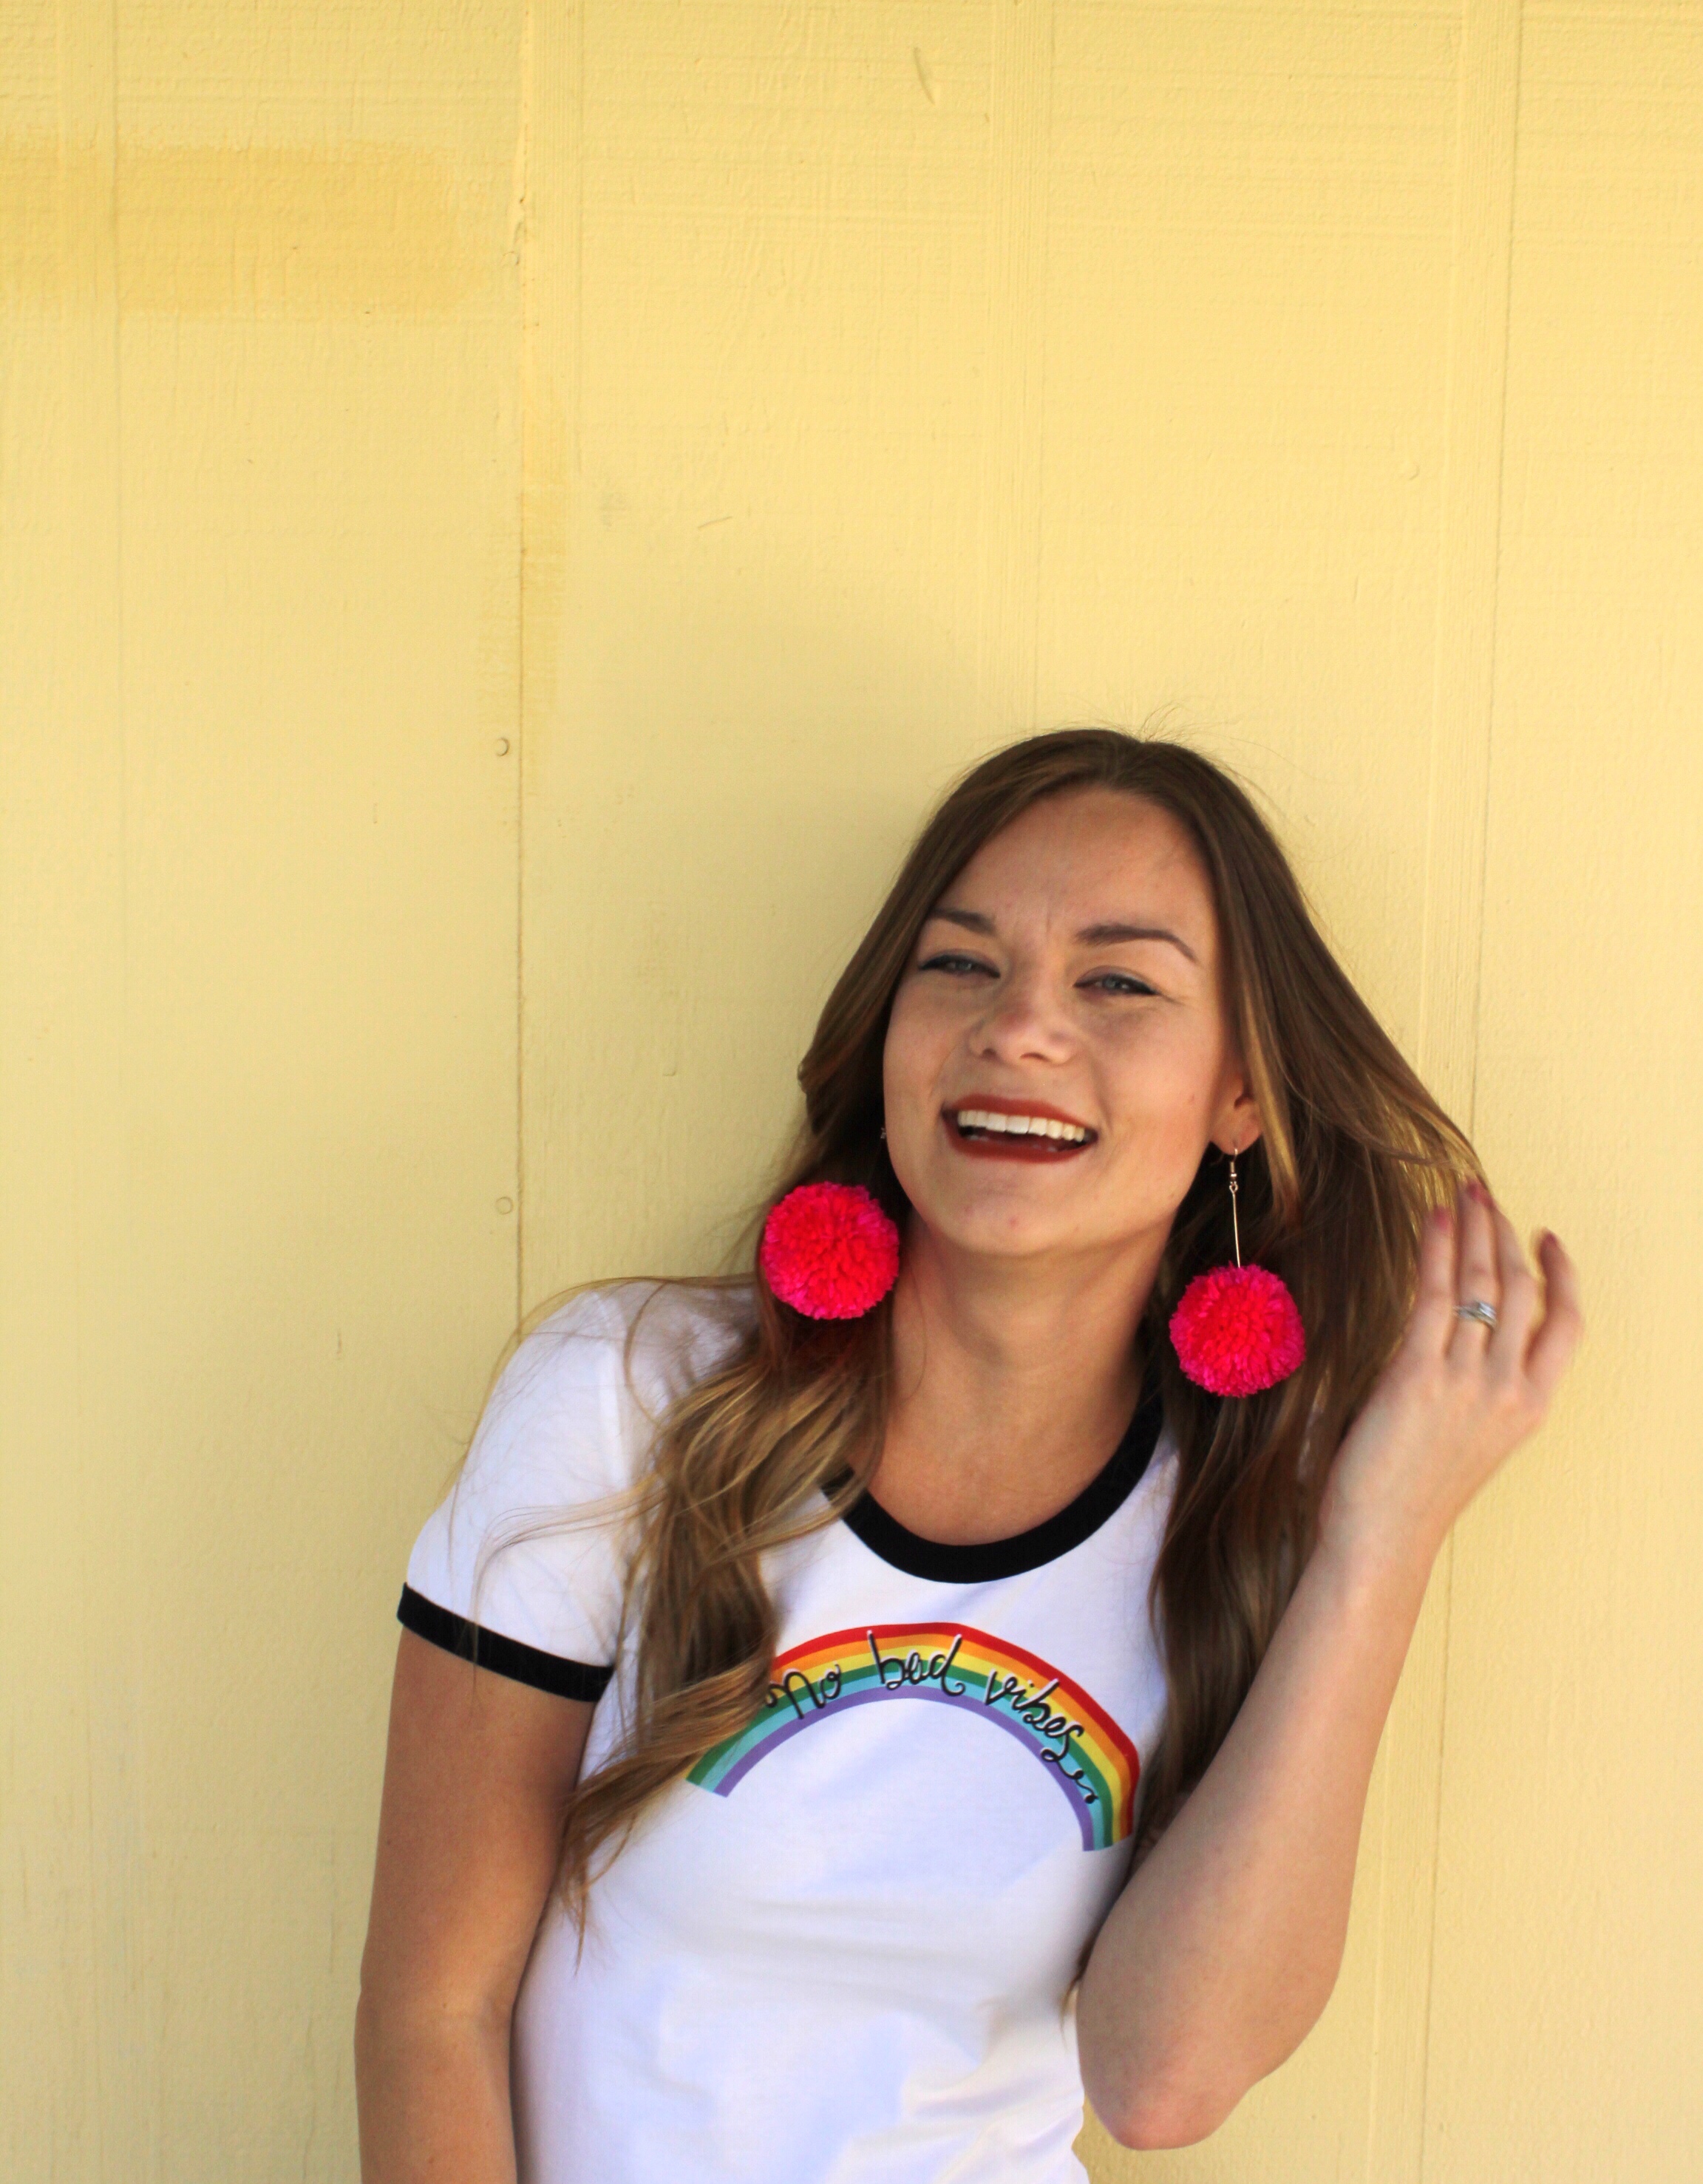 Hot Pink Pom Pom Earrings and No Bad Vibes Rainbow 70's Style Ringer Tee 